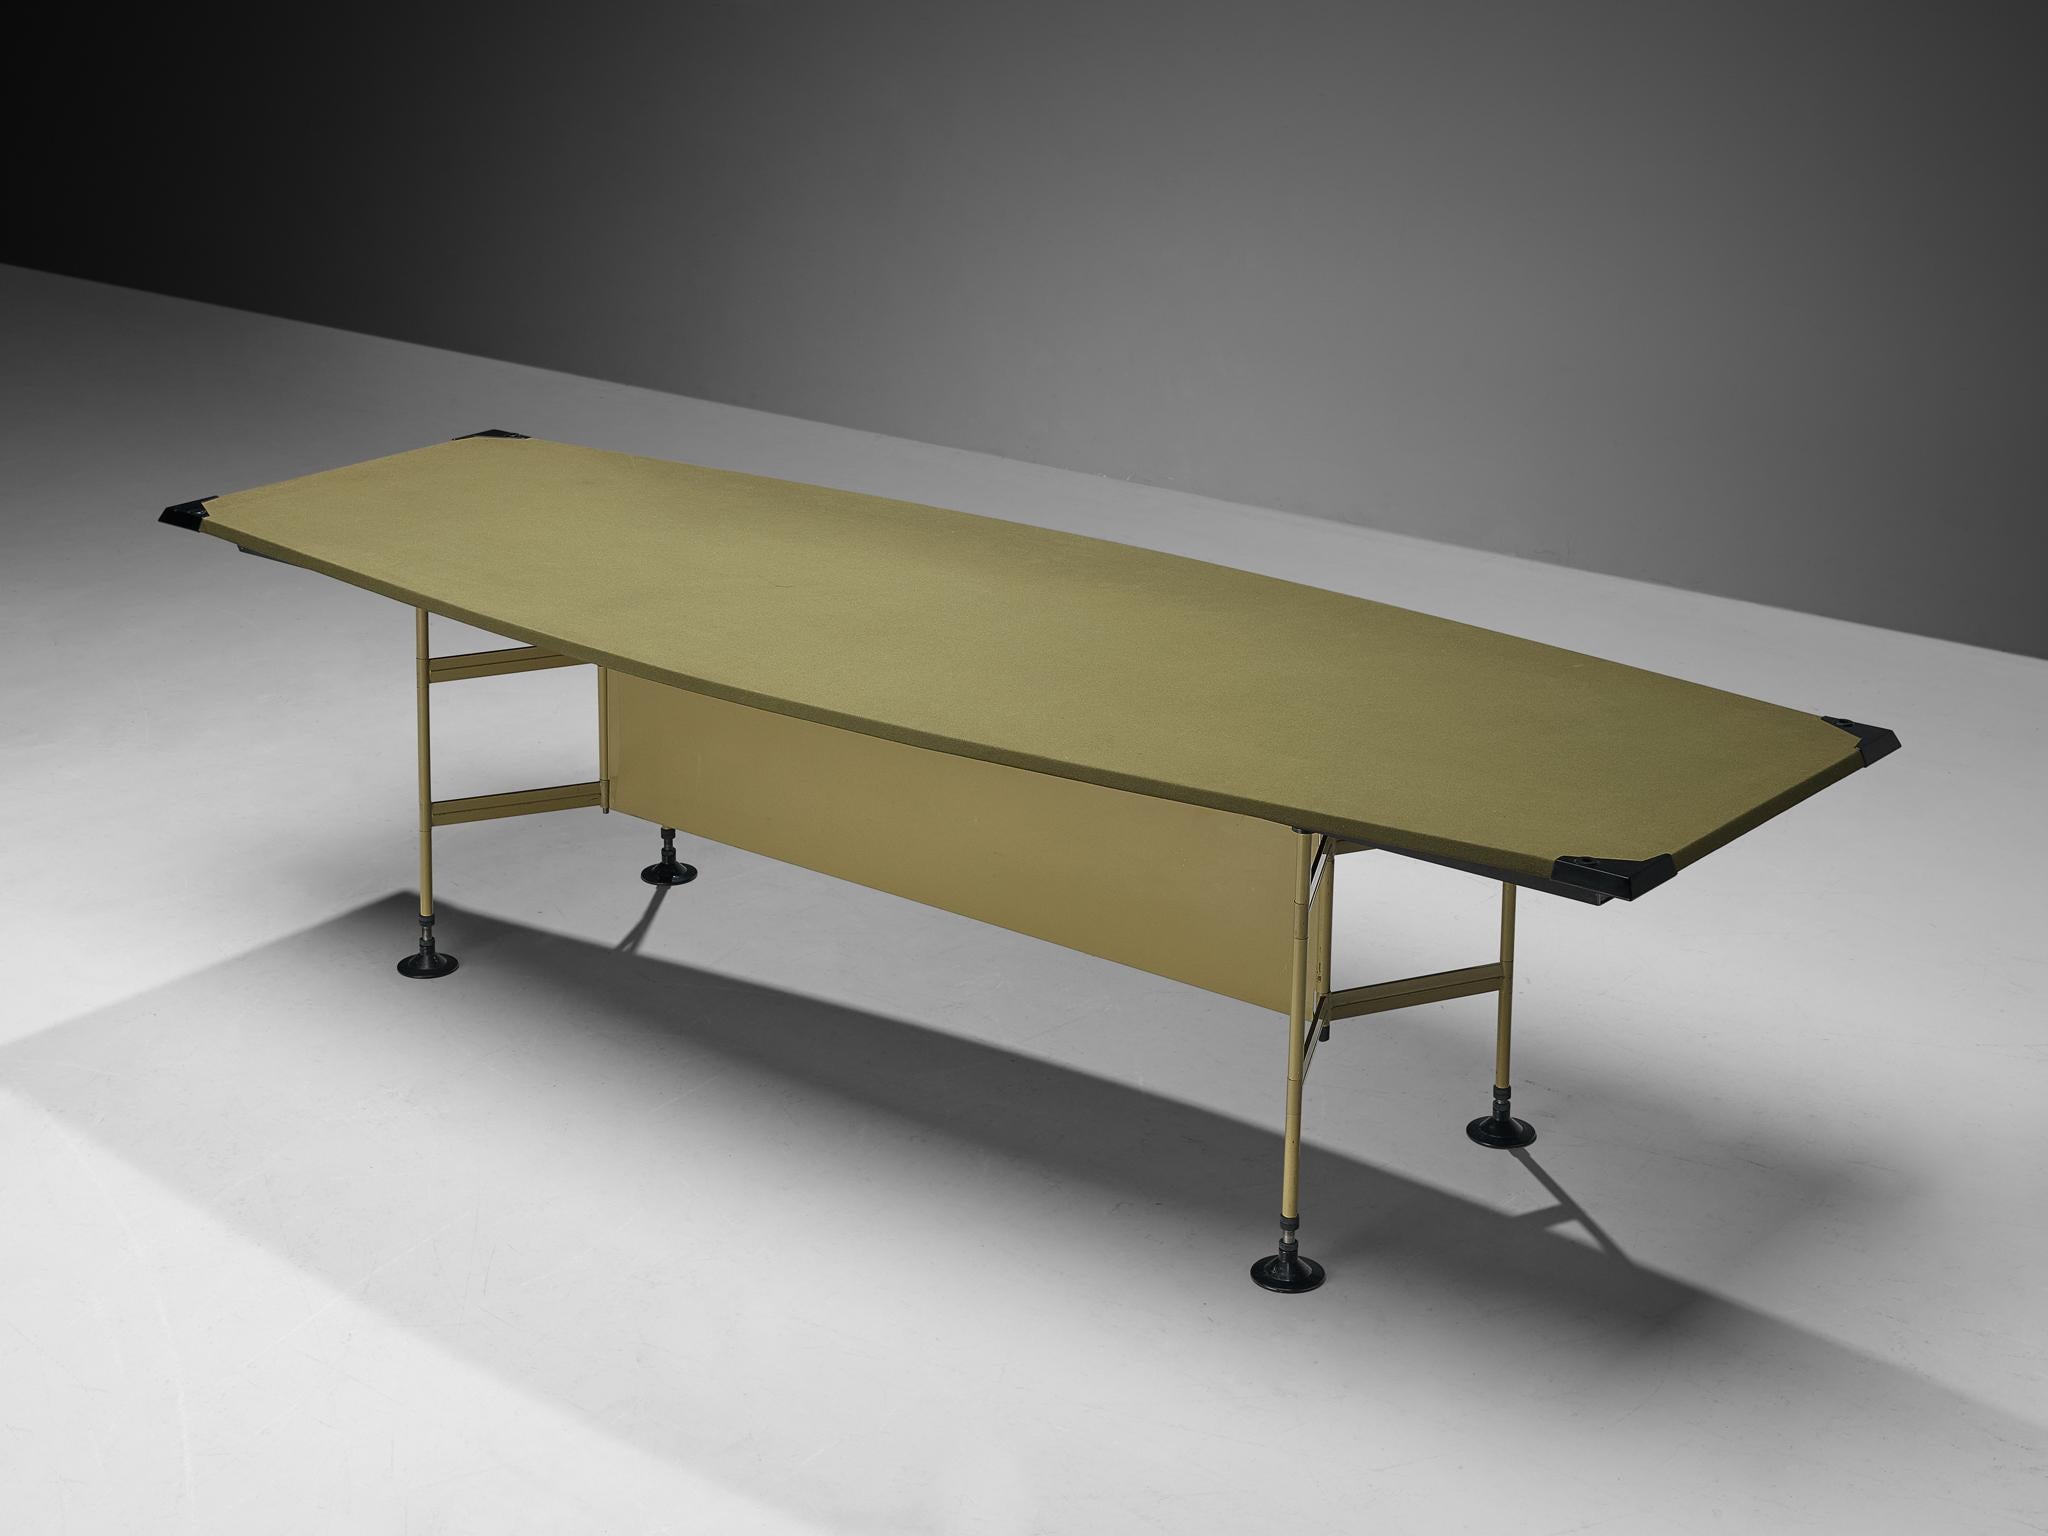 Studio BBPR for Olivetti, conference table, metal, plastic, felt, Italy, 1960s

A large dining or work table designed by Studio BBPR for Olivetti. The table is part of the 'Spazio' series, a line the studio designed for the manufacturer Olivetti.